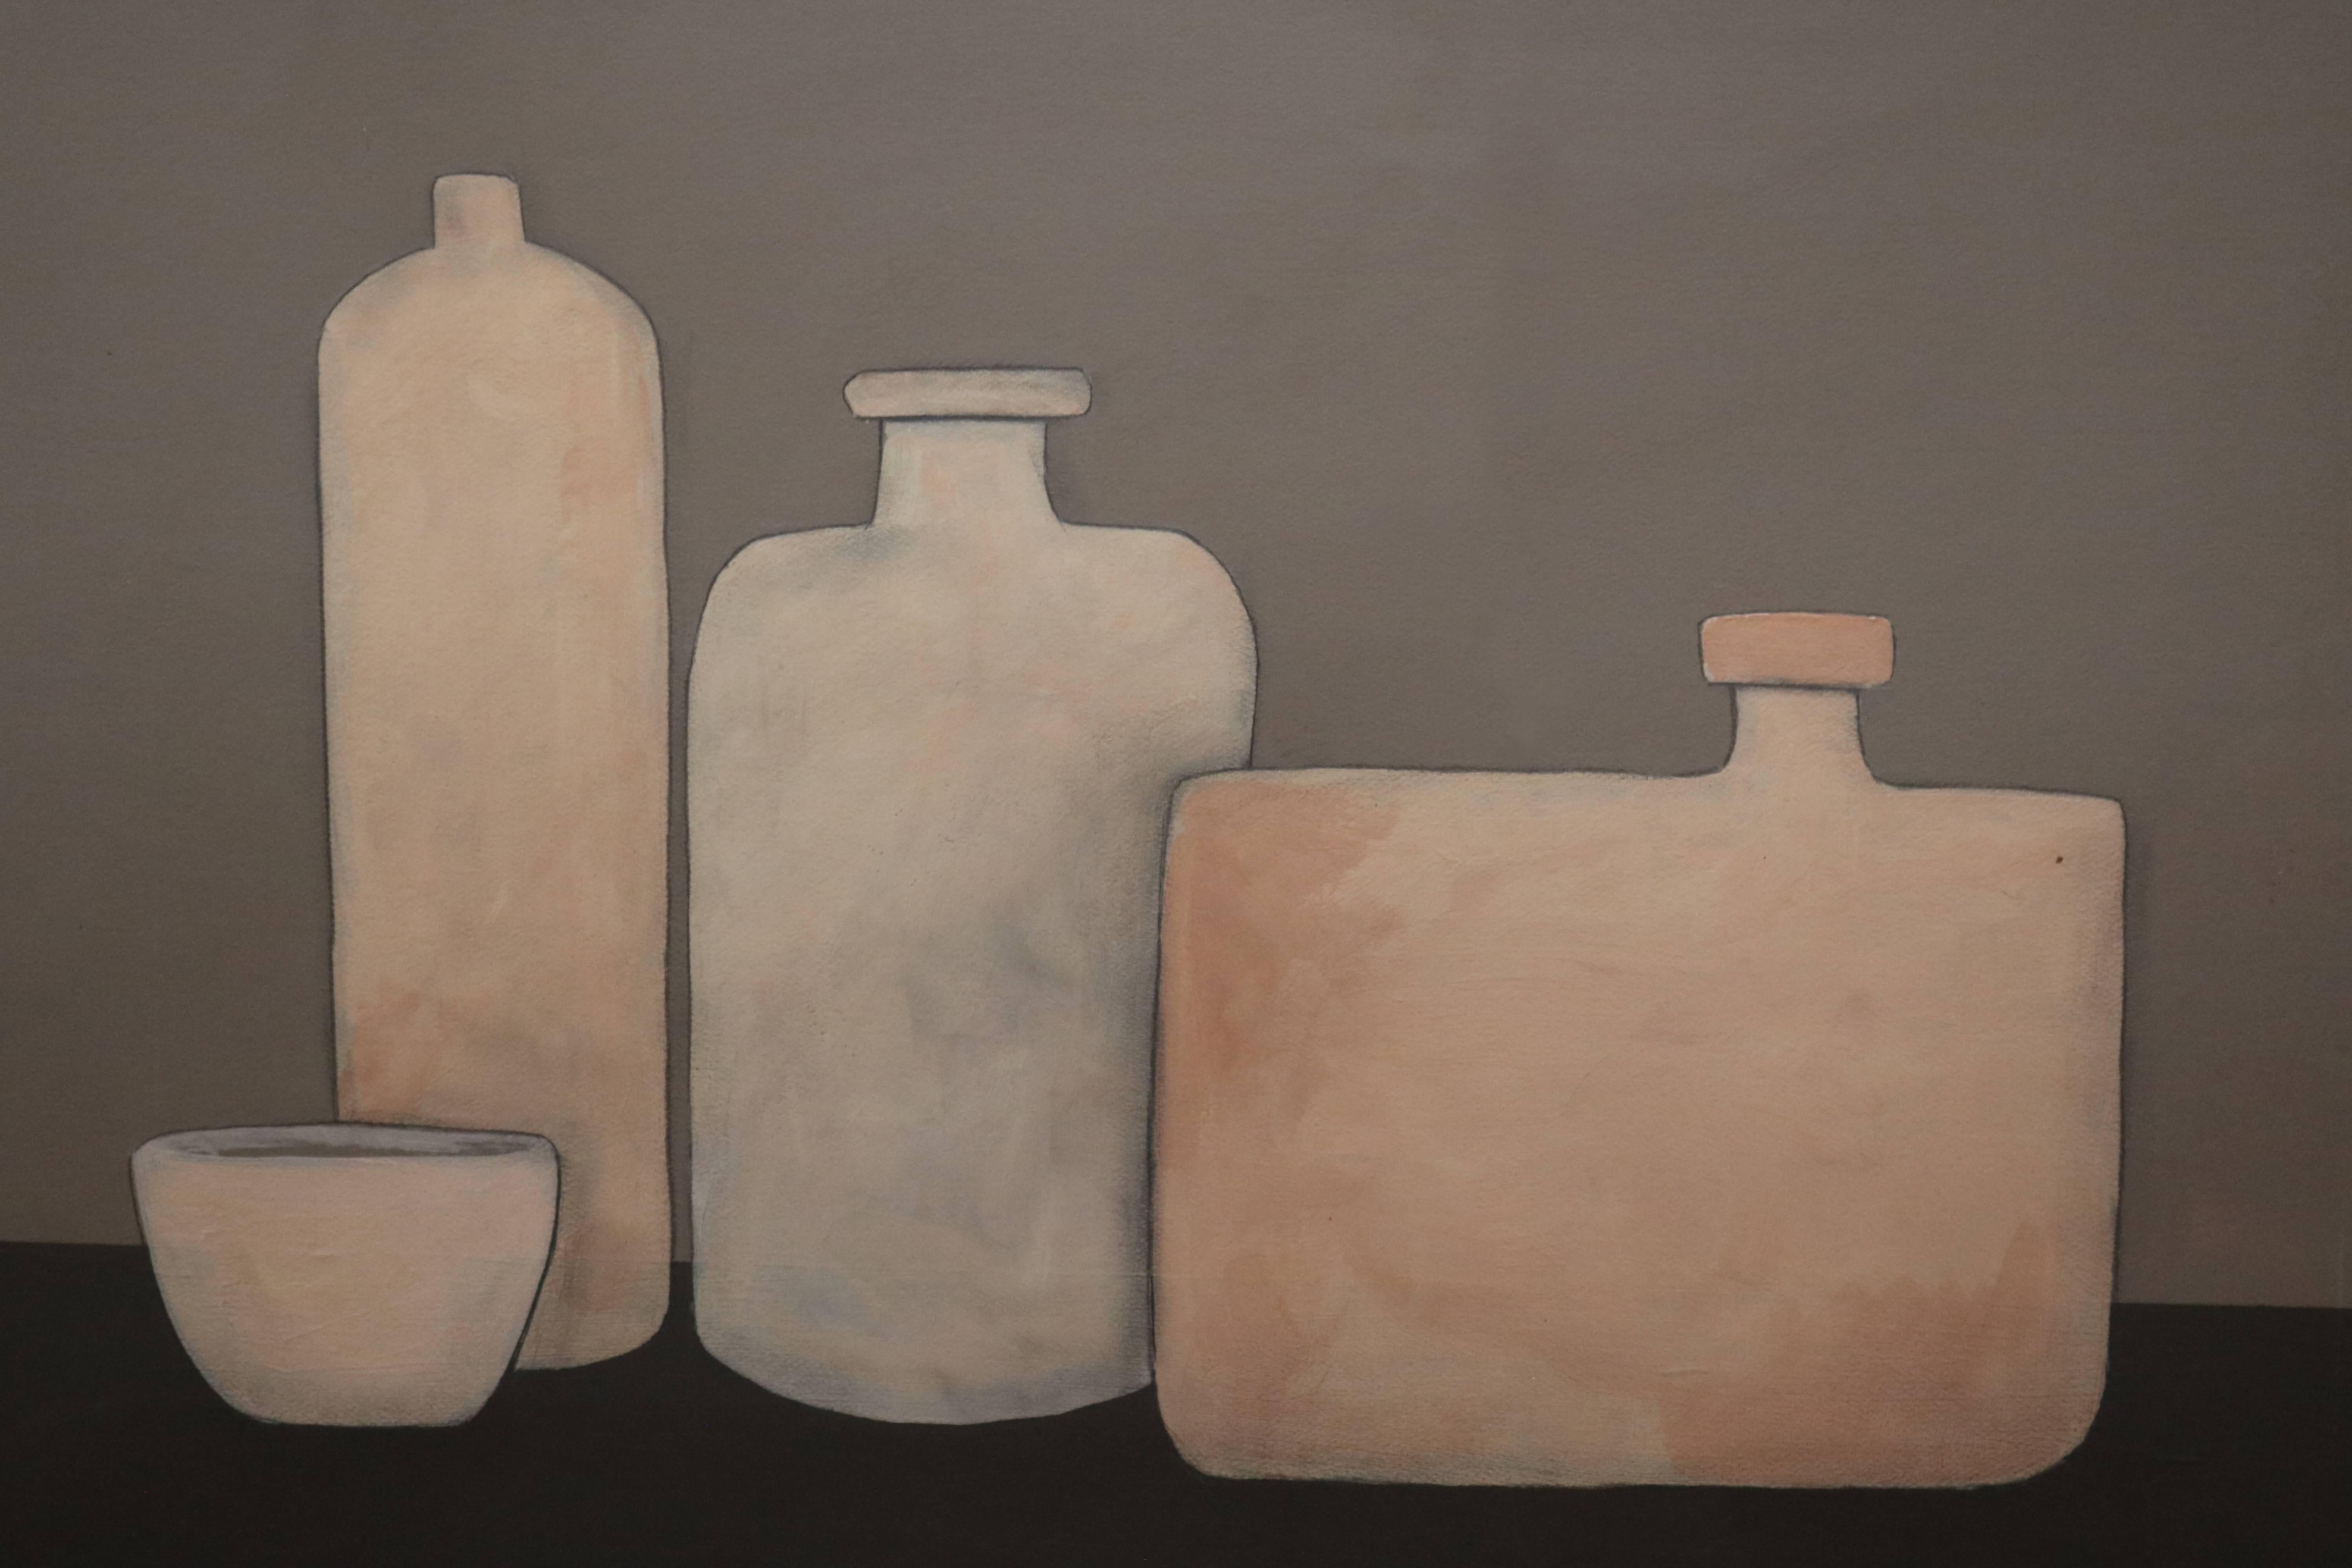 Mixed-media painting of three vases and a small bowl or cup by Monterrey Bay based artist Jerry Williamson. Signed by the artist. Contact us for additional pieces.